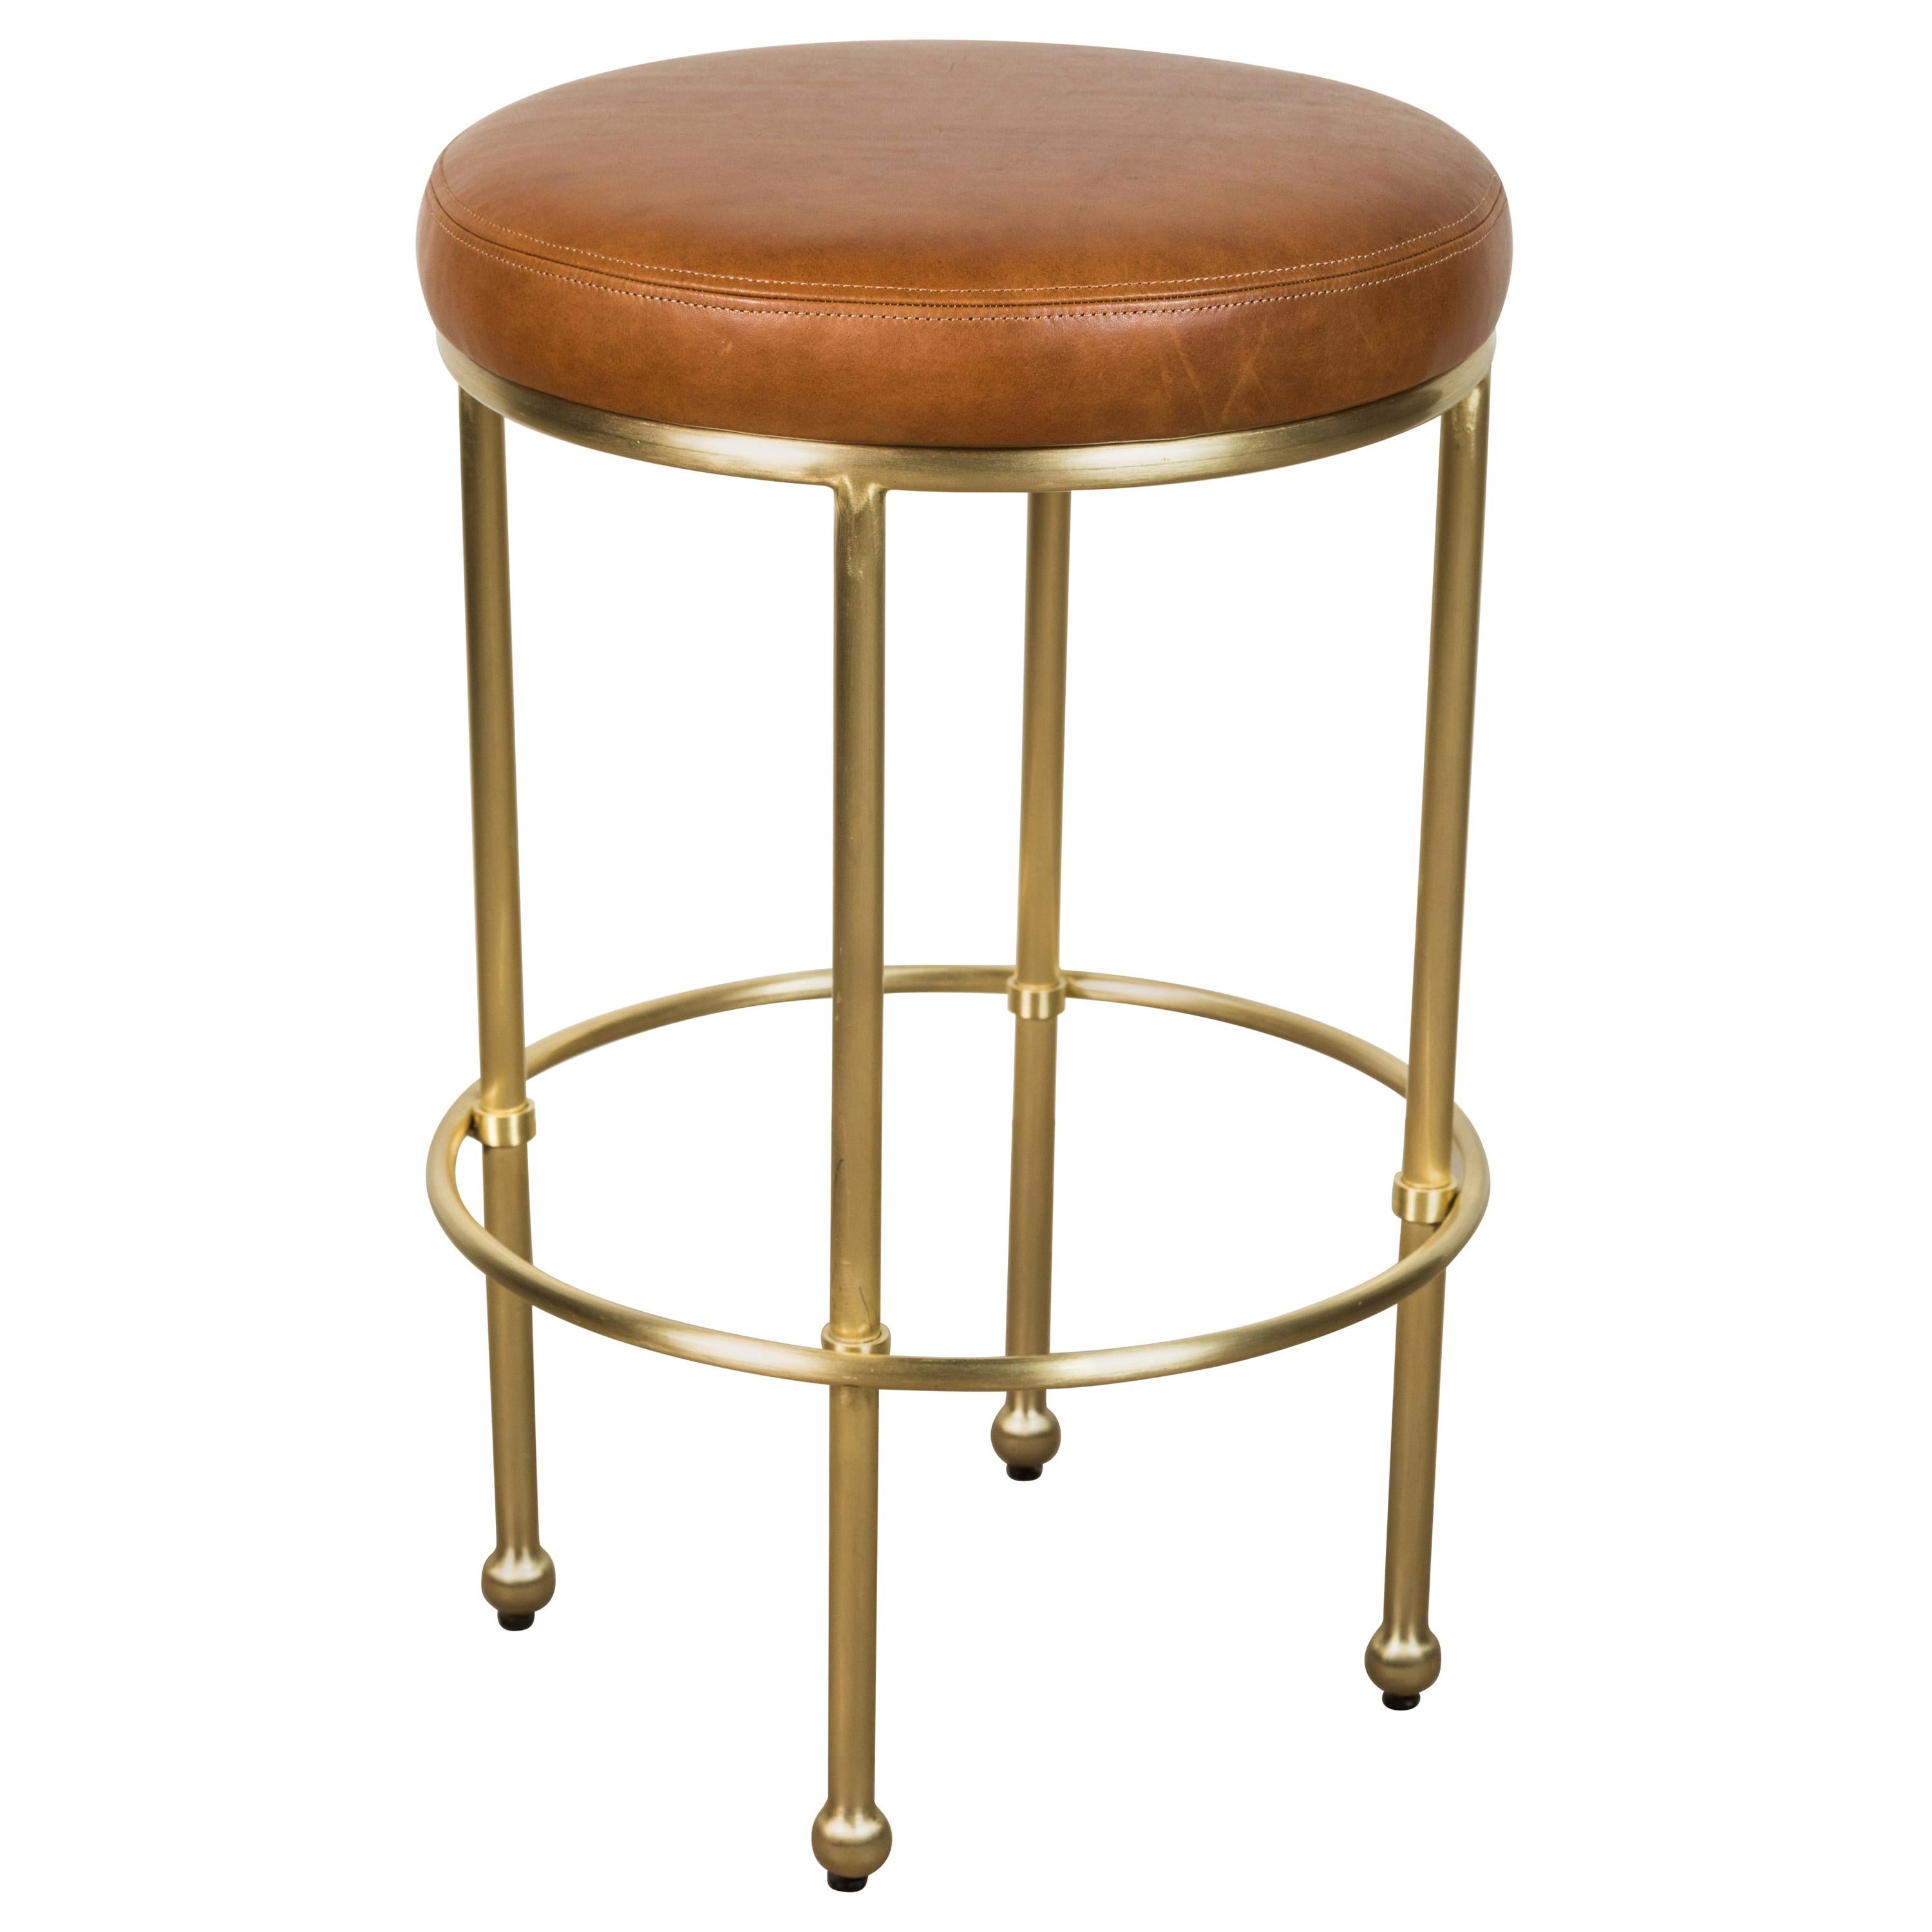 Orsini Counterstool in Leather and Brass by Lawson-Fenning